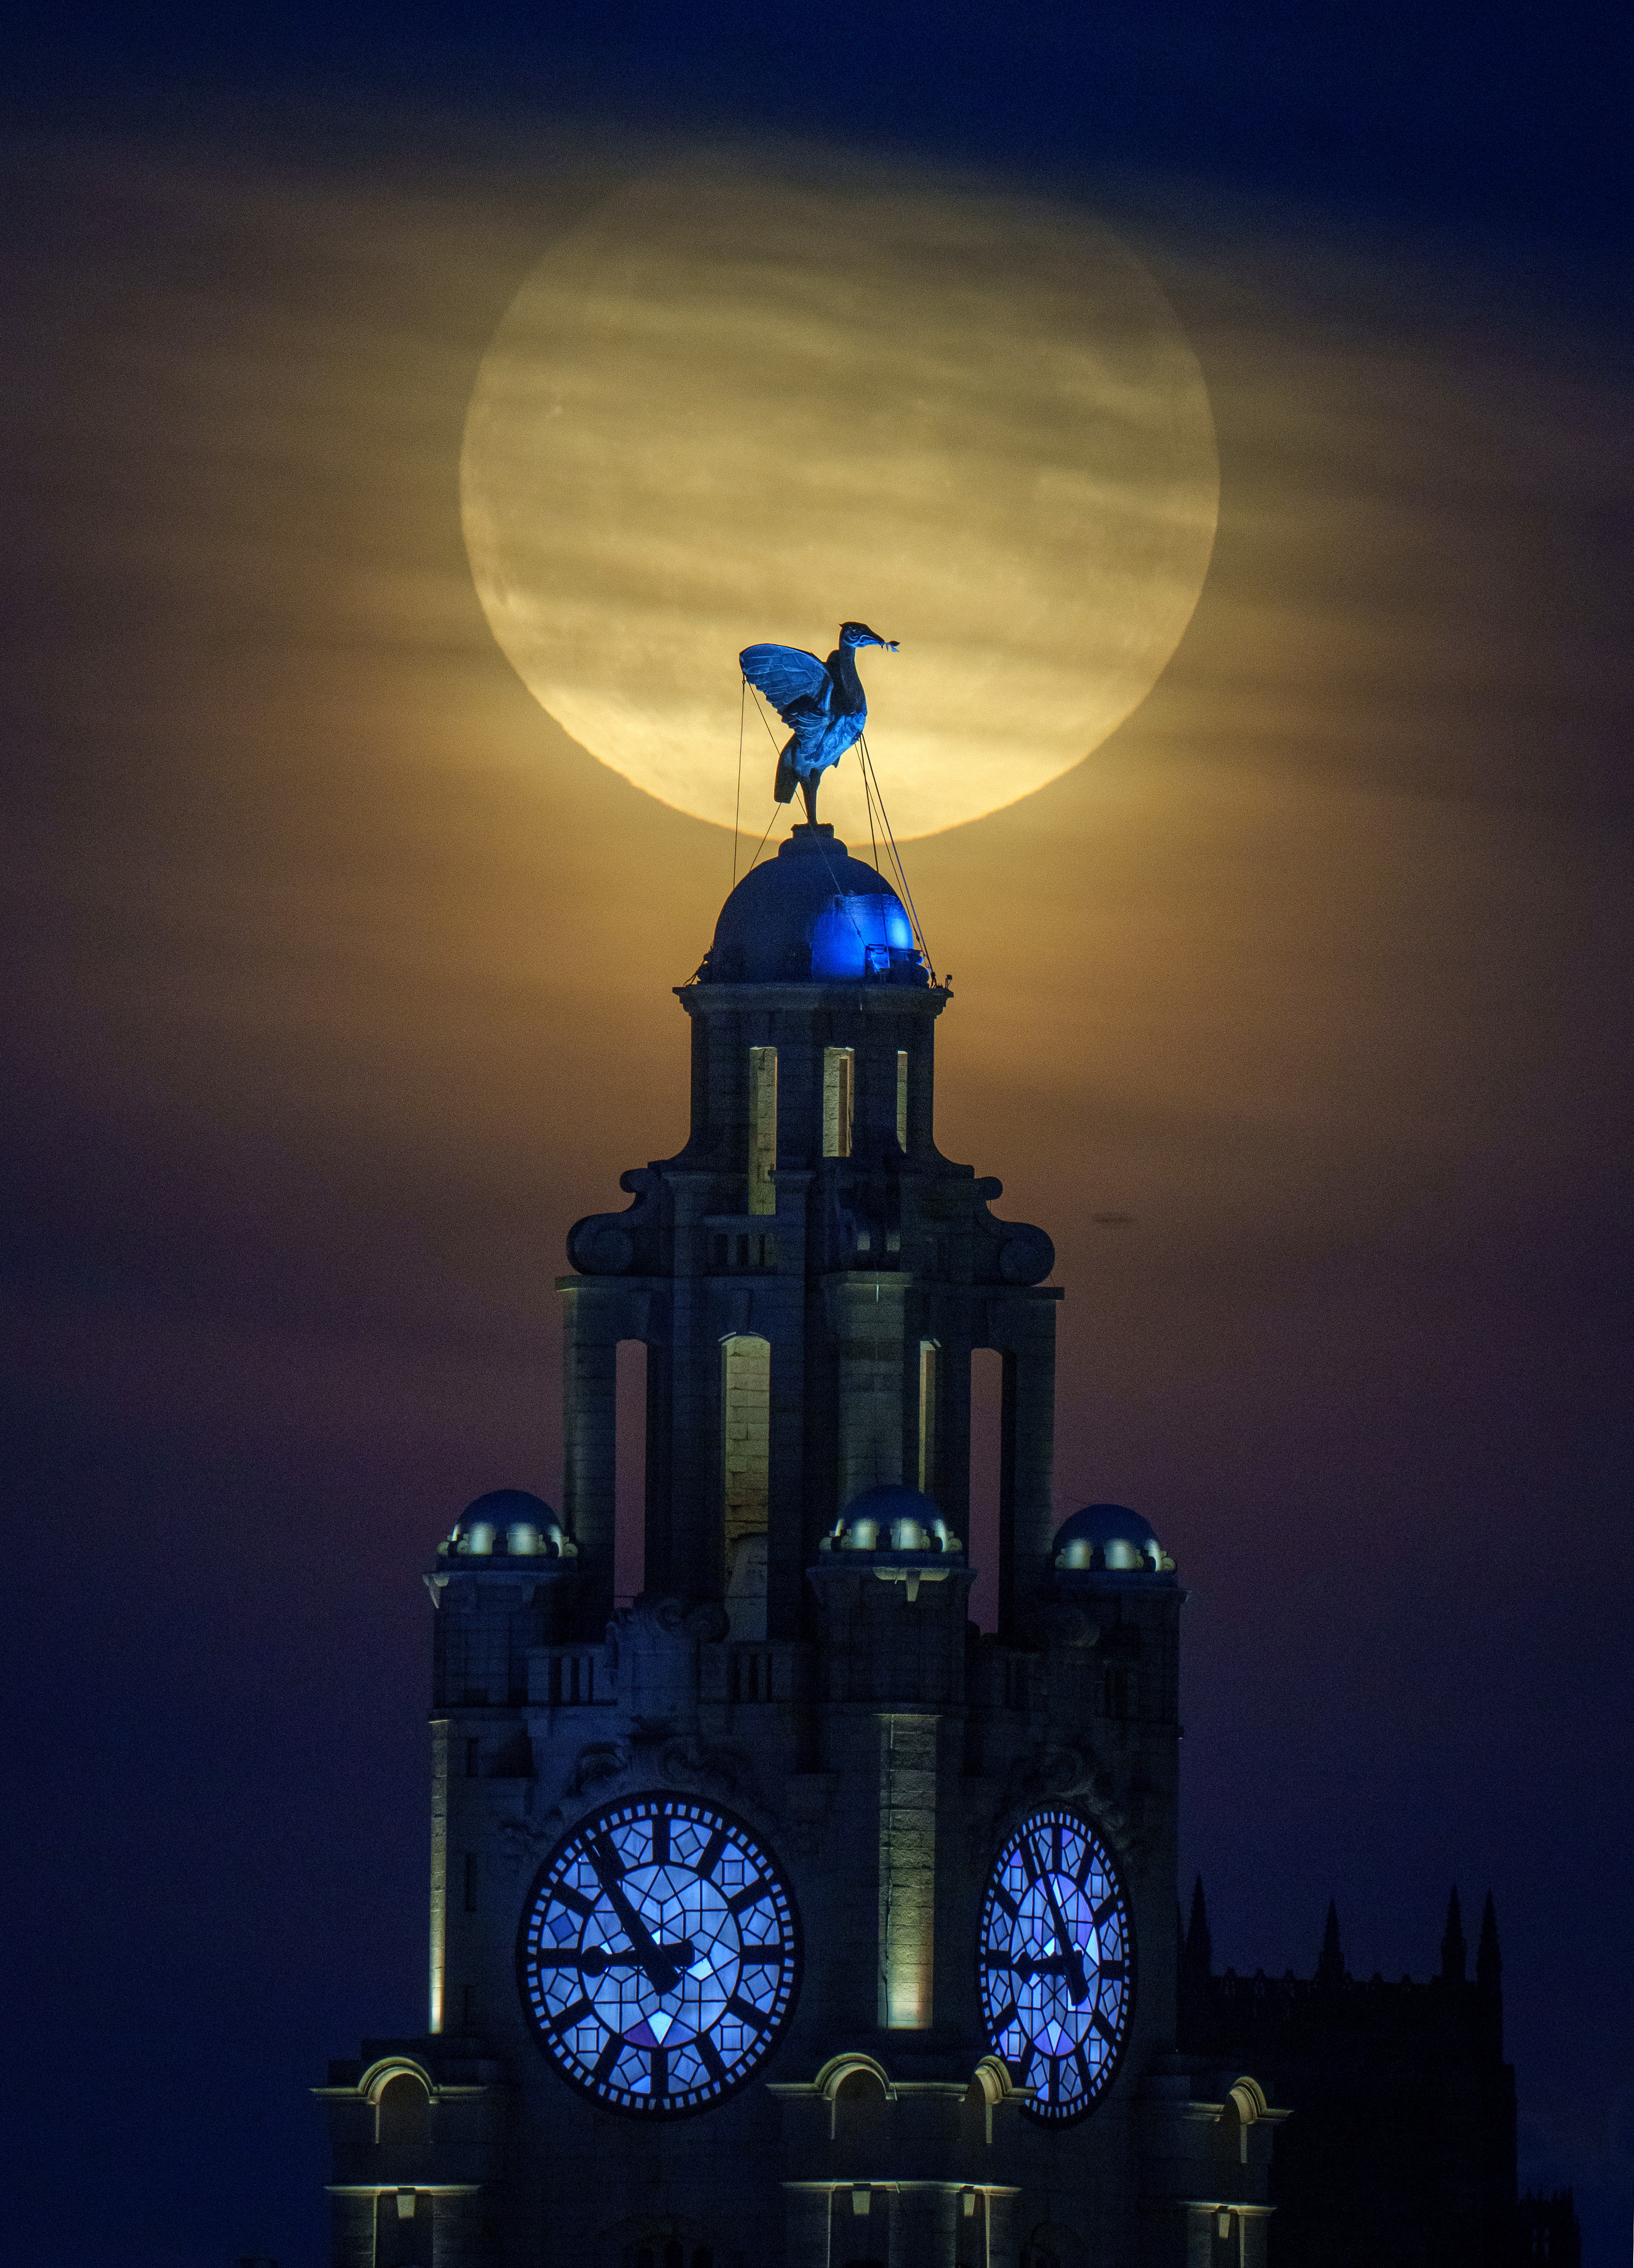 The blue supermoon is seen behind the Royal Liver Building in Liverpool, United Kingdom